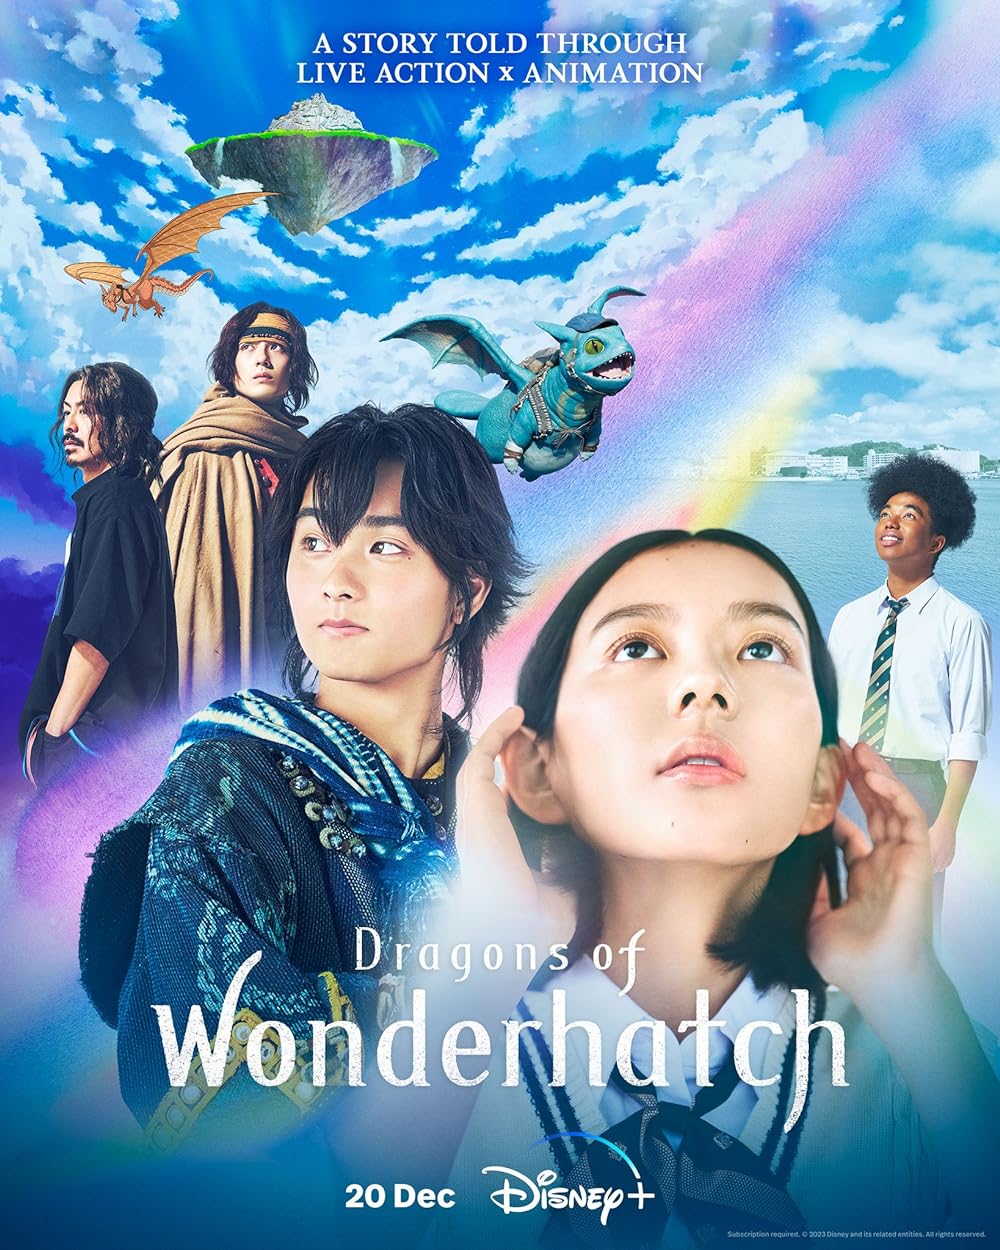 Dragons of Wonderhatch (December 20) - Streaming on Disney+ HotstarDragons of Wonderhatch introduces Nagi, a high school student with the extraordinary ability to visualize colors through sounds, and Thaim from an alternate dimension, Upananta. As their paths converge, the series blurs the boundaries between reality and a fantastical world teeming with dragons.